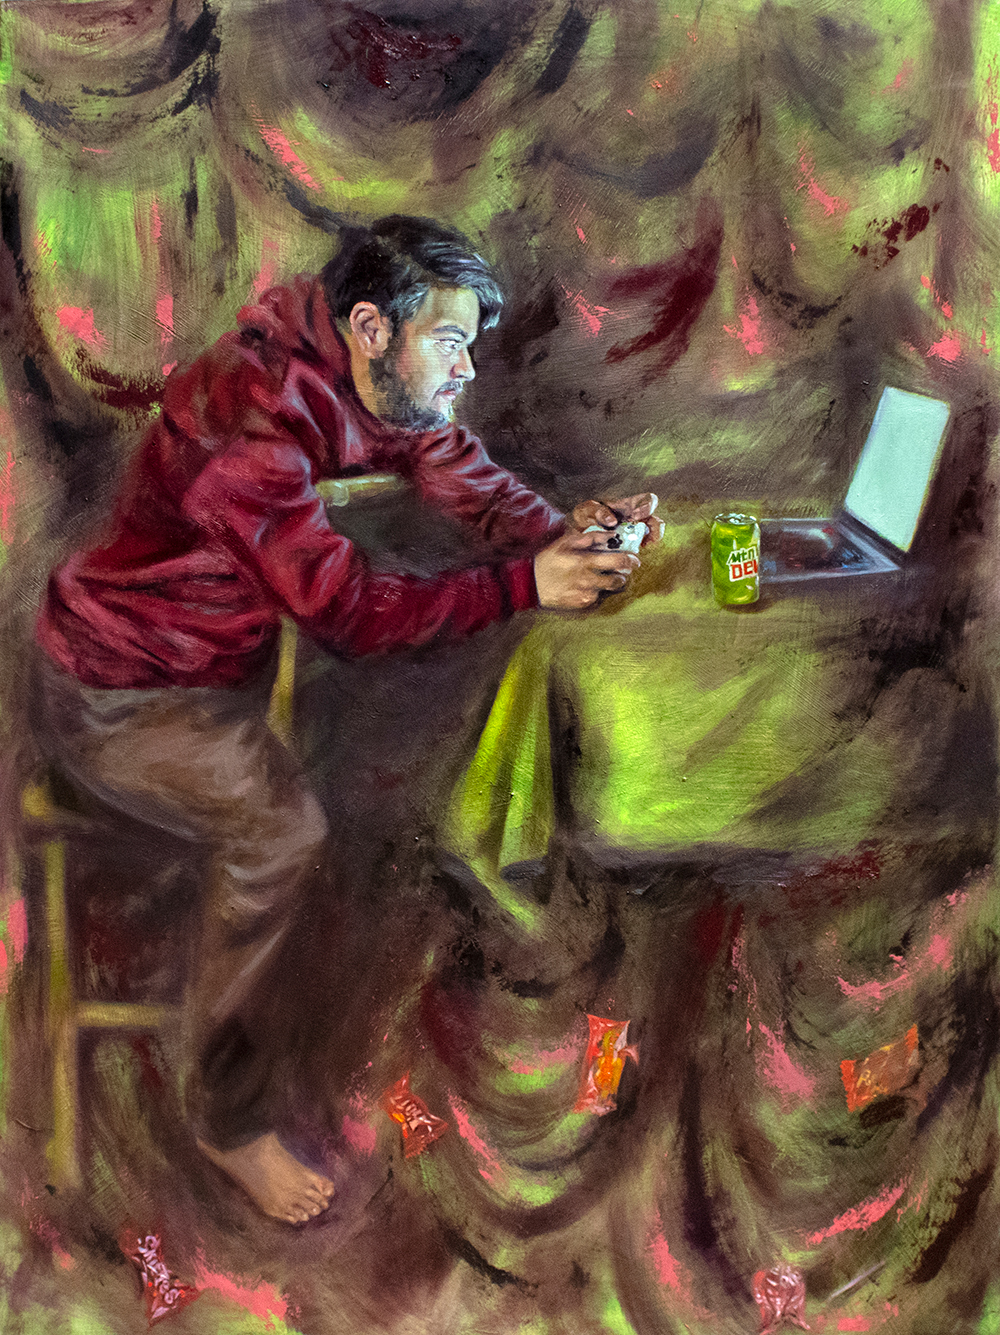 Guy slouches in chair holding game controller and facing lit screen. He is surrounded by wrappers, cans, and chaos; an allegory for work as a broken concept.